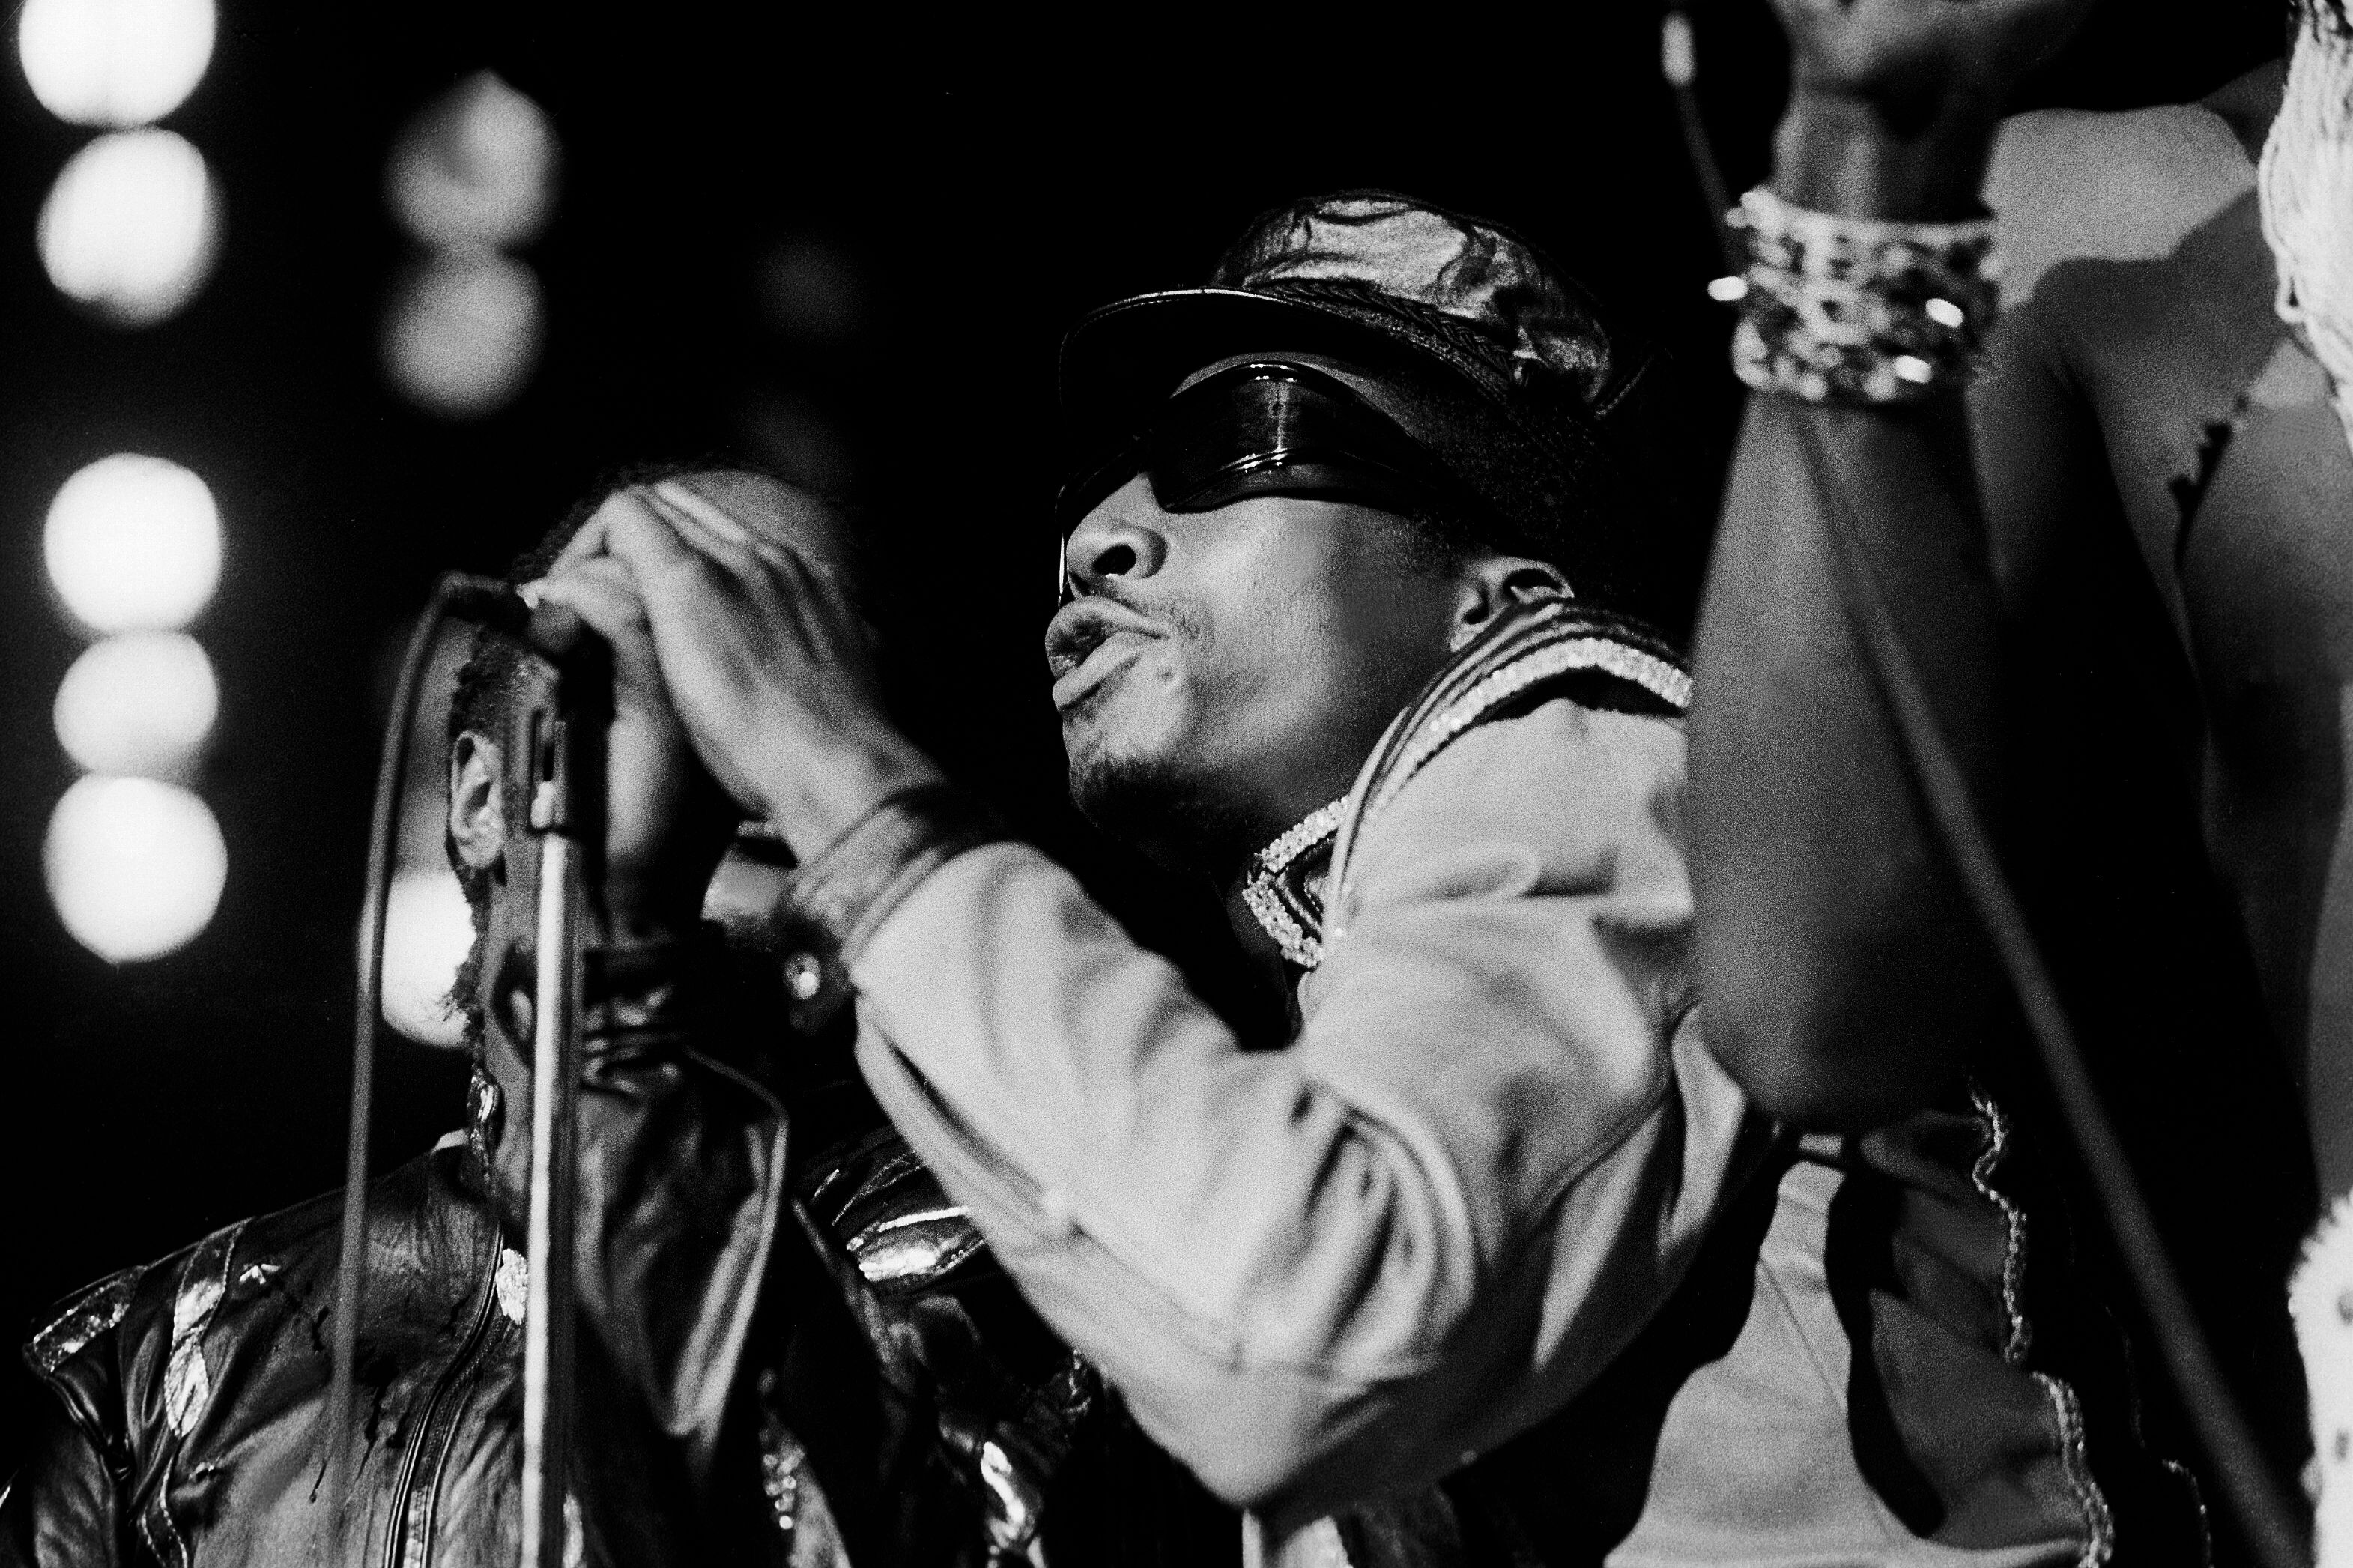 Grandmaster Flash at the UIC Pavillion in Chicago, Illinois, September 17, 1982. Credit: Paul Natkin/Getty Images